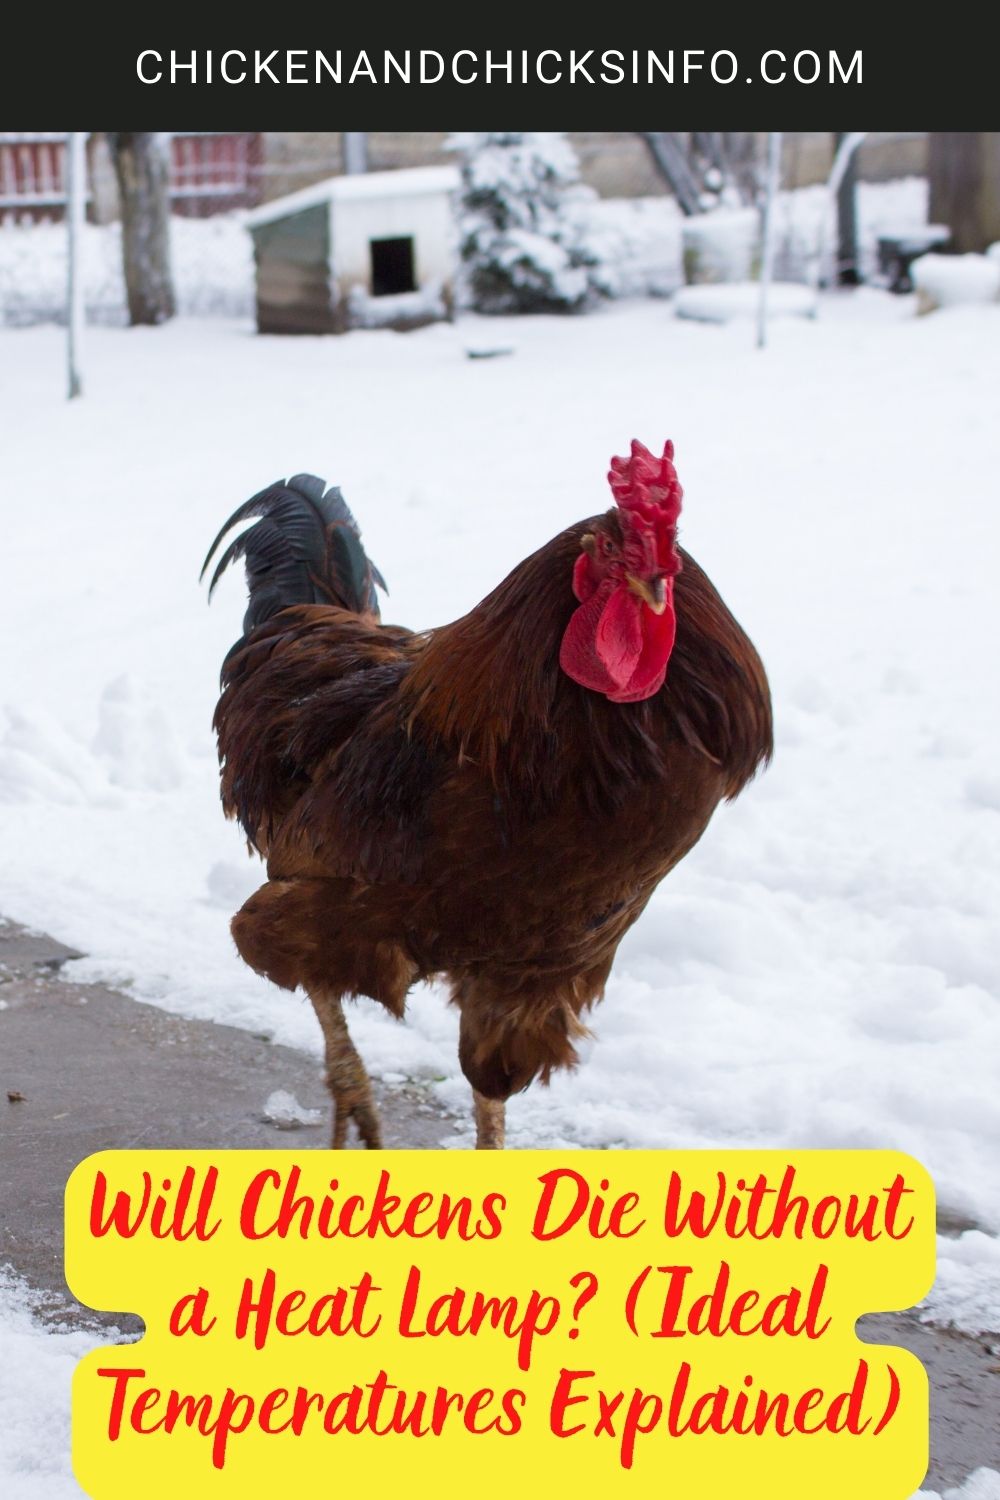 Will Chickens Die Without a Heat Lamp? (Ideal Temperatures Explained) poster.
